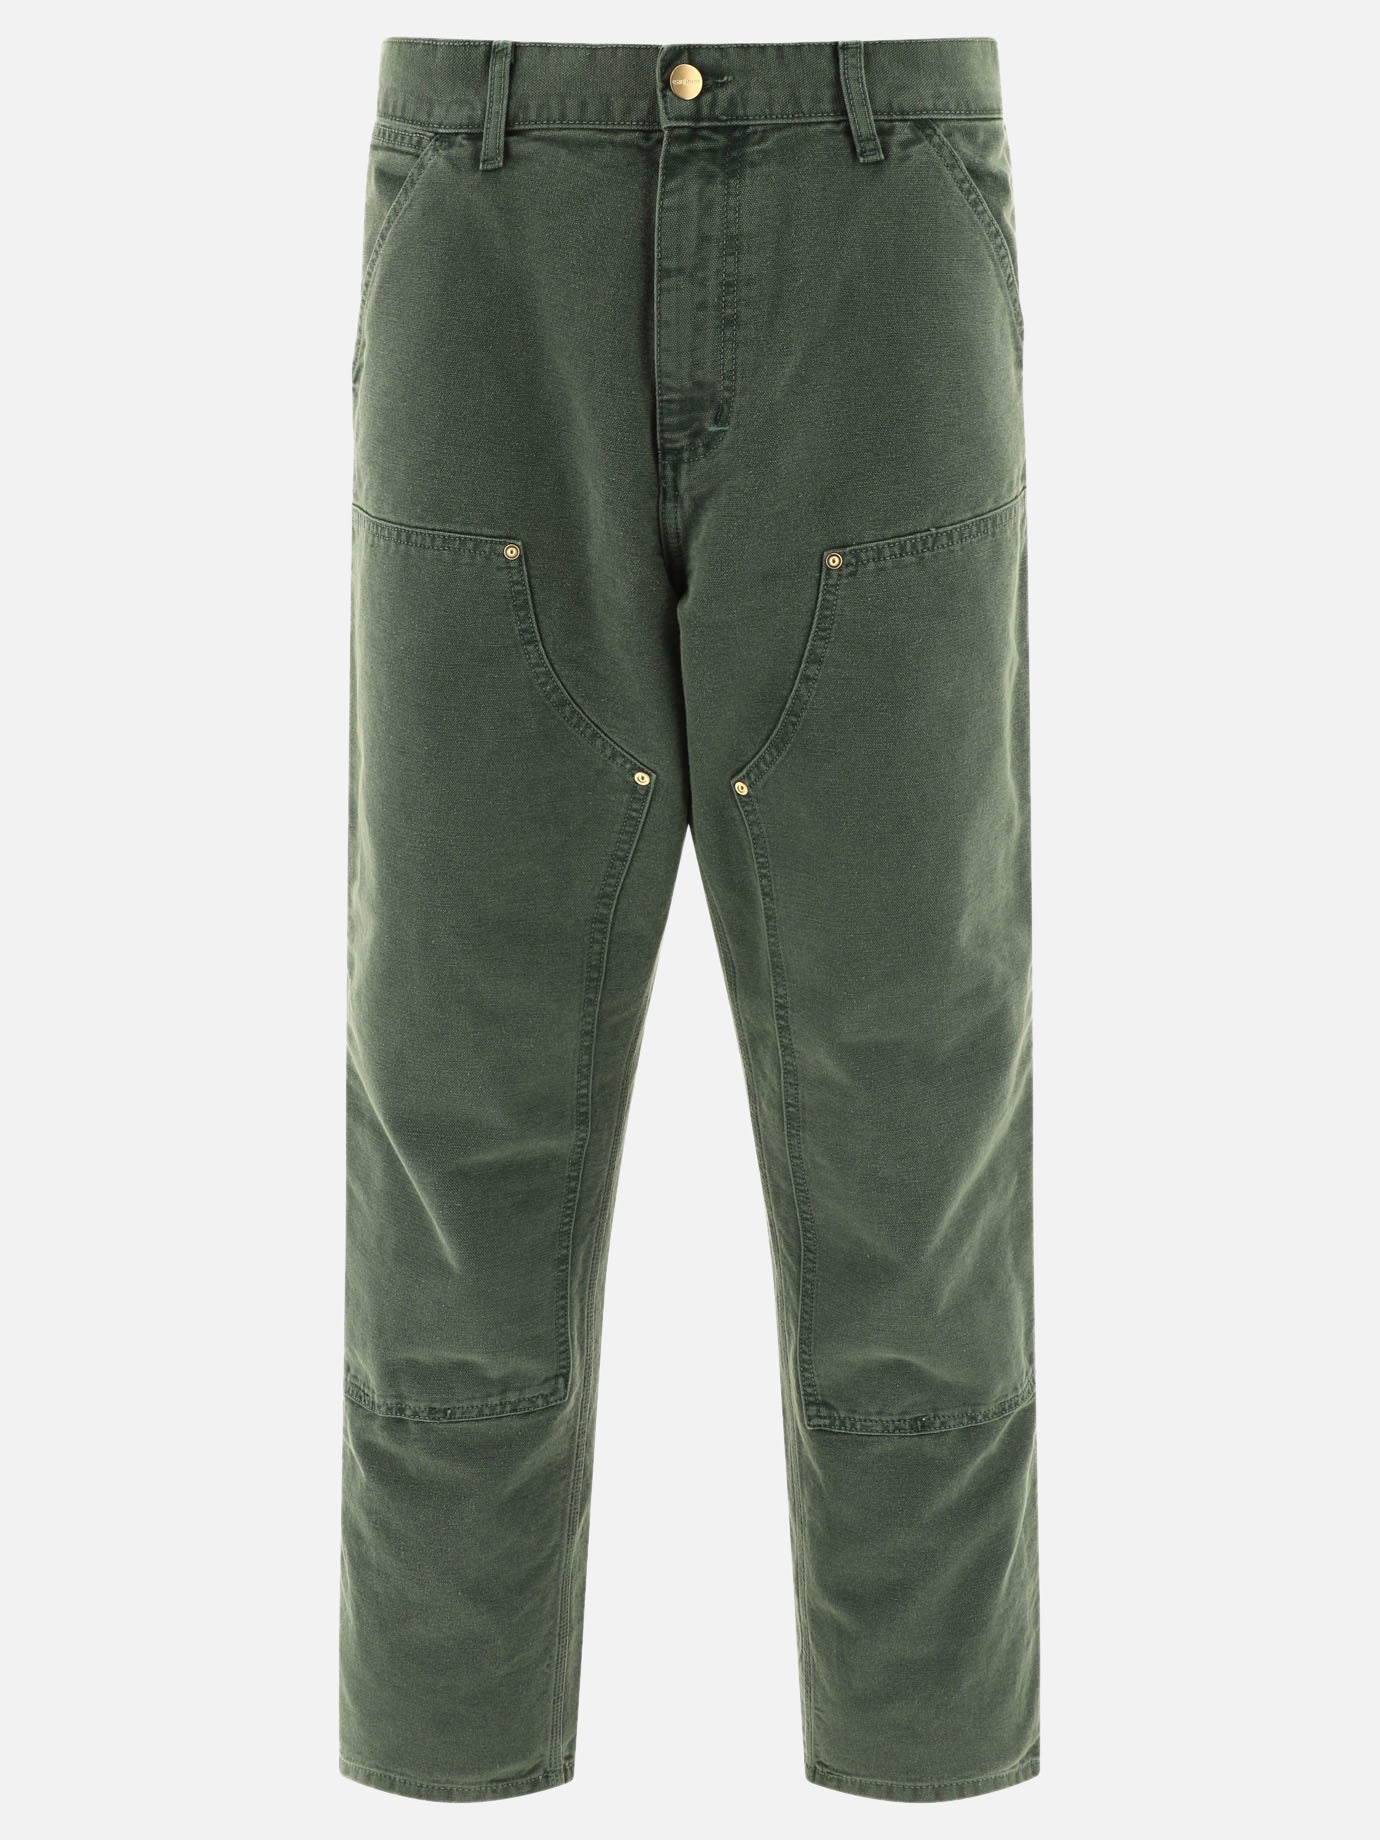 "Double Knee" trousers